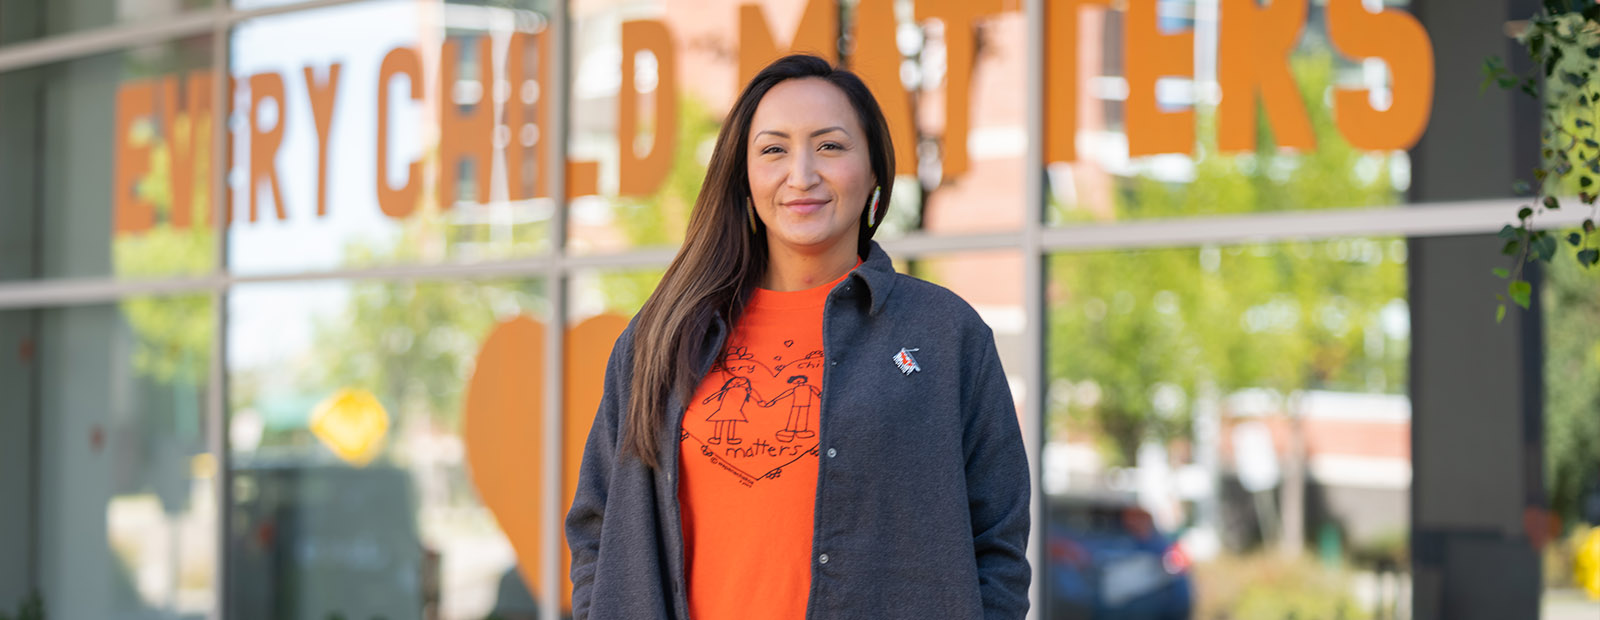 Terri Cardinal wears an orange shirt and stands in front of the glass windows of kihêw waciston, the university's Indigenous centre